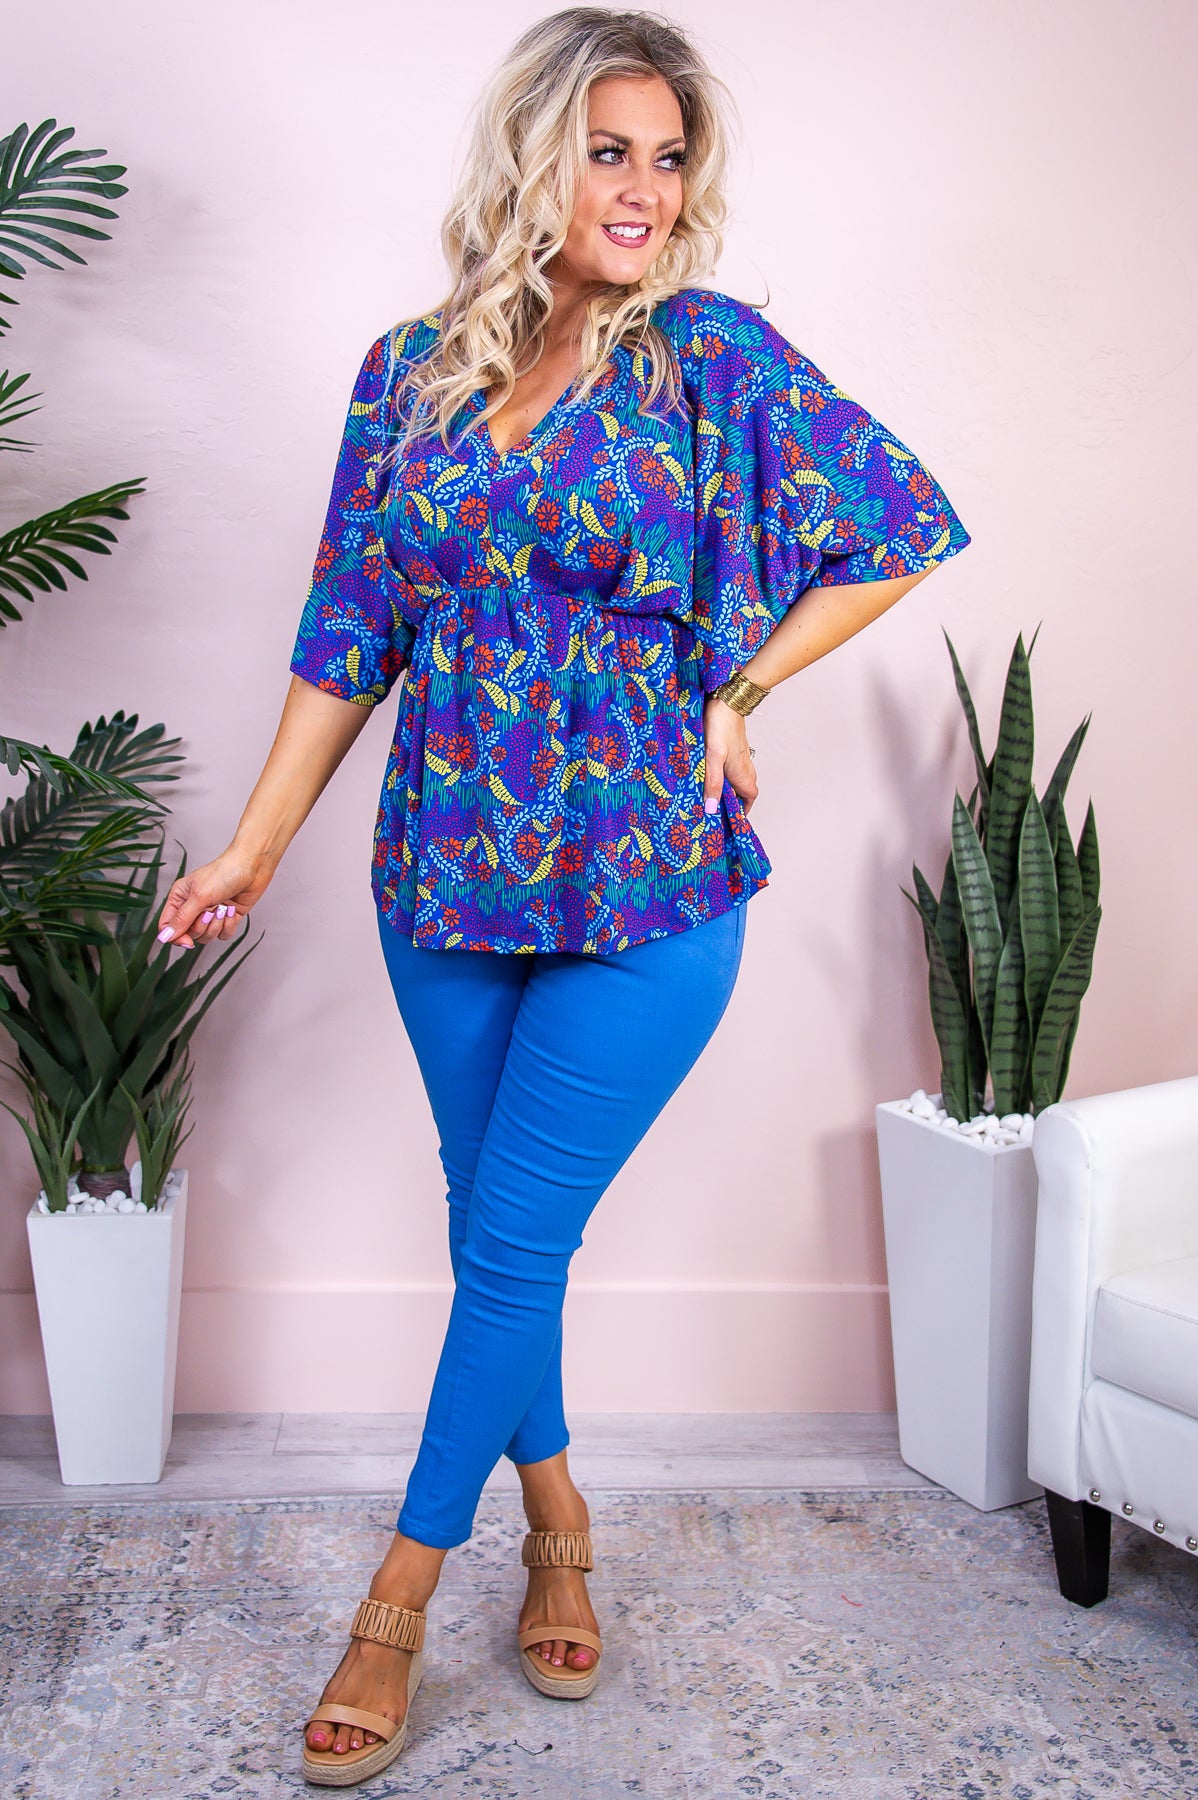 This Magical Moment Royal Blue/Multi Color Floral Babydoll Top - T9198RBL